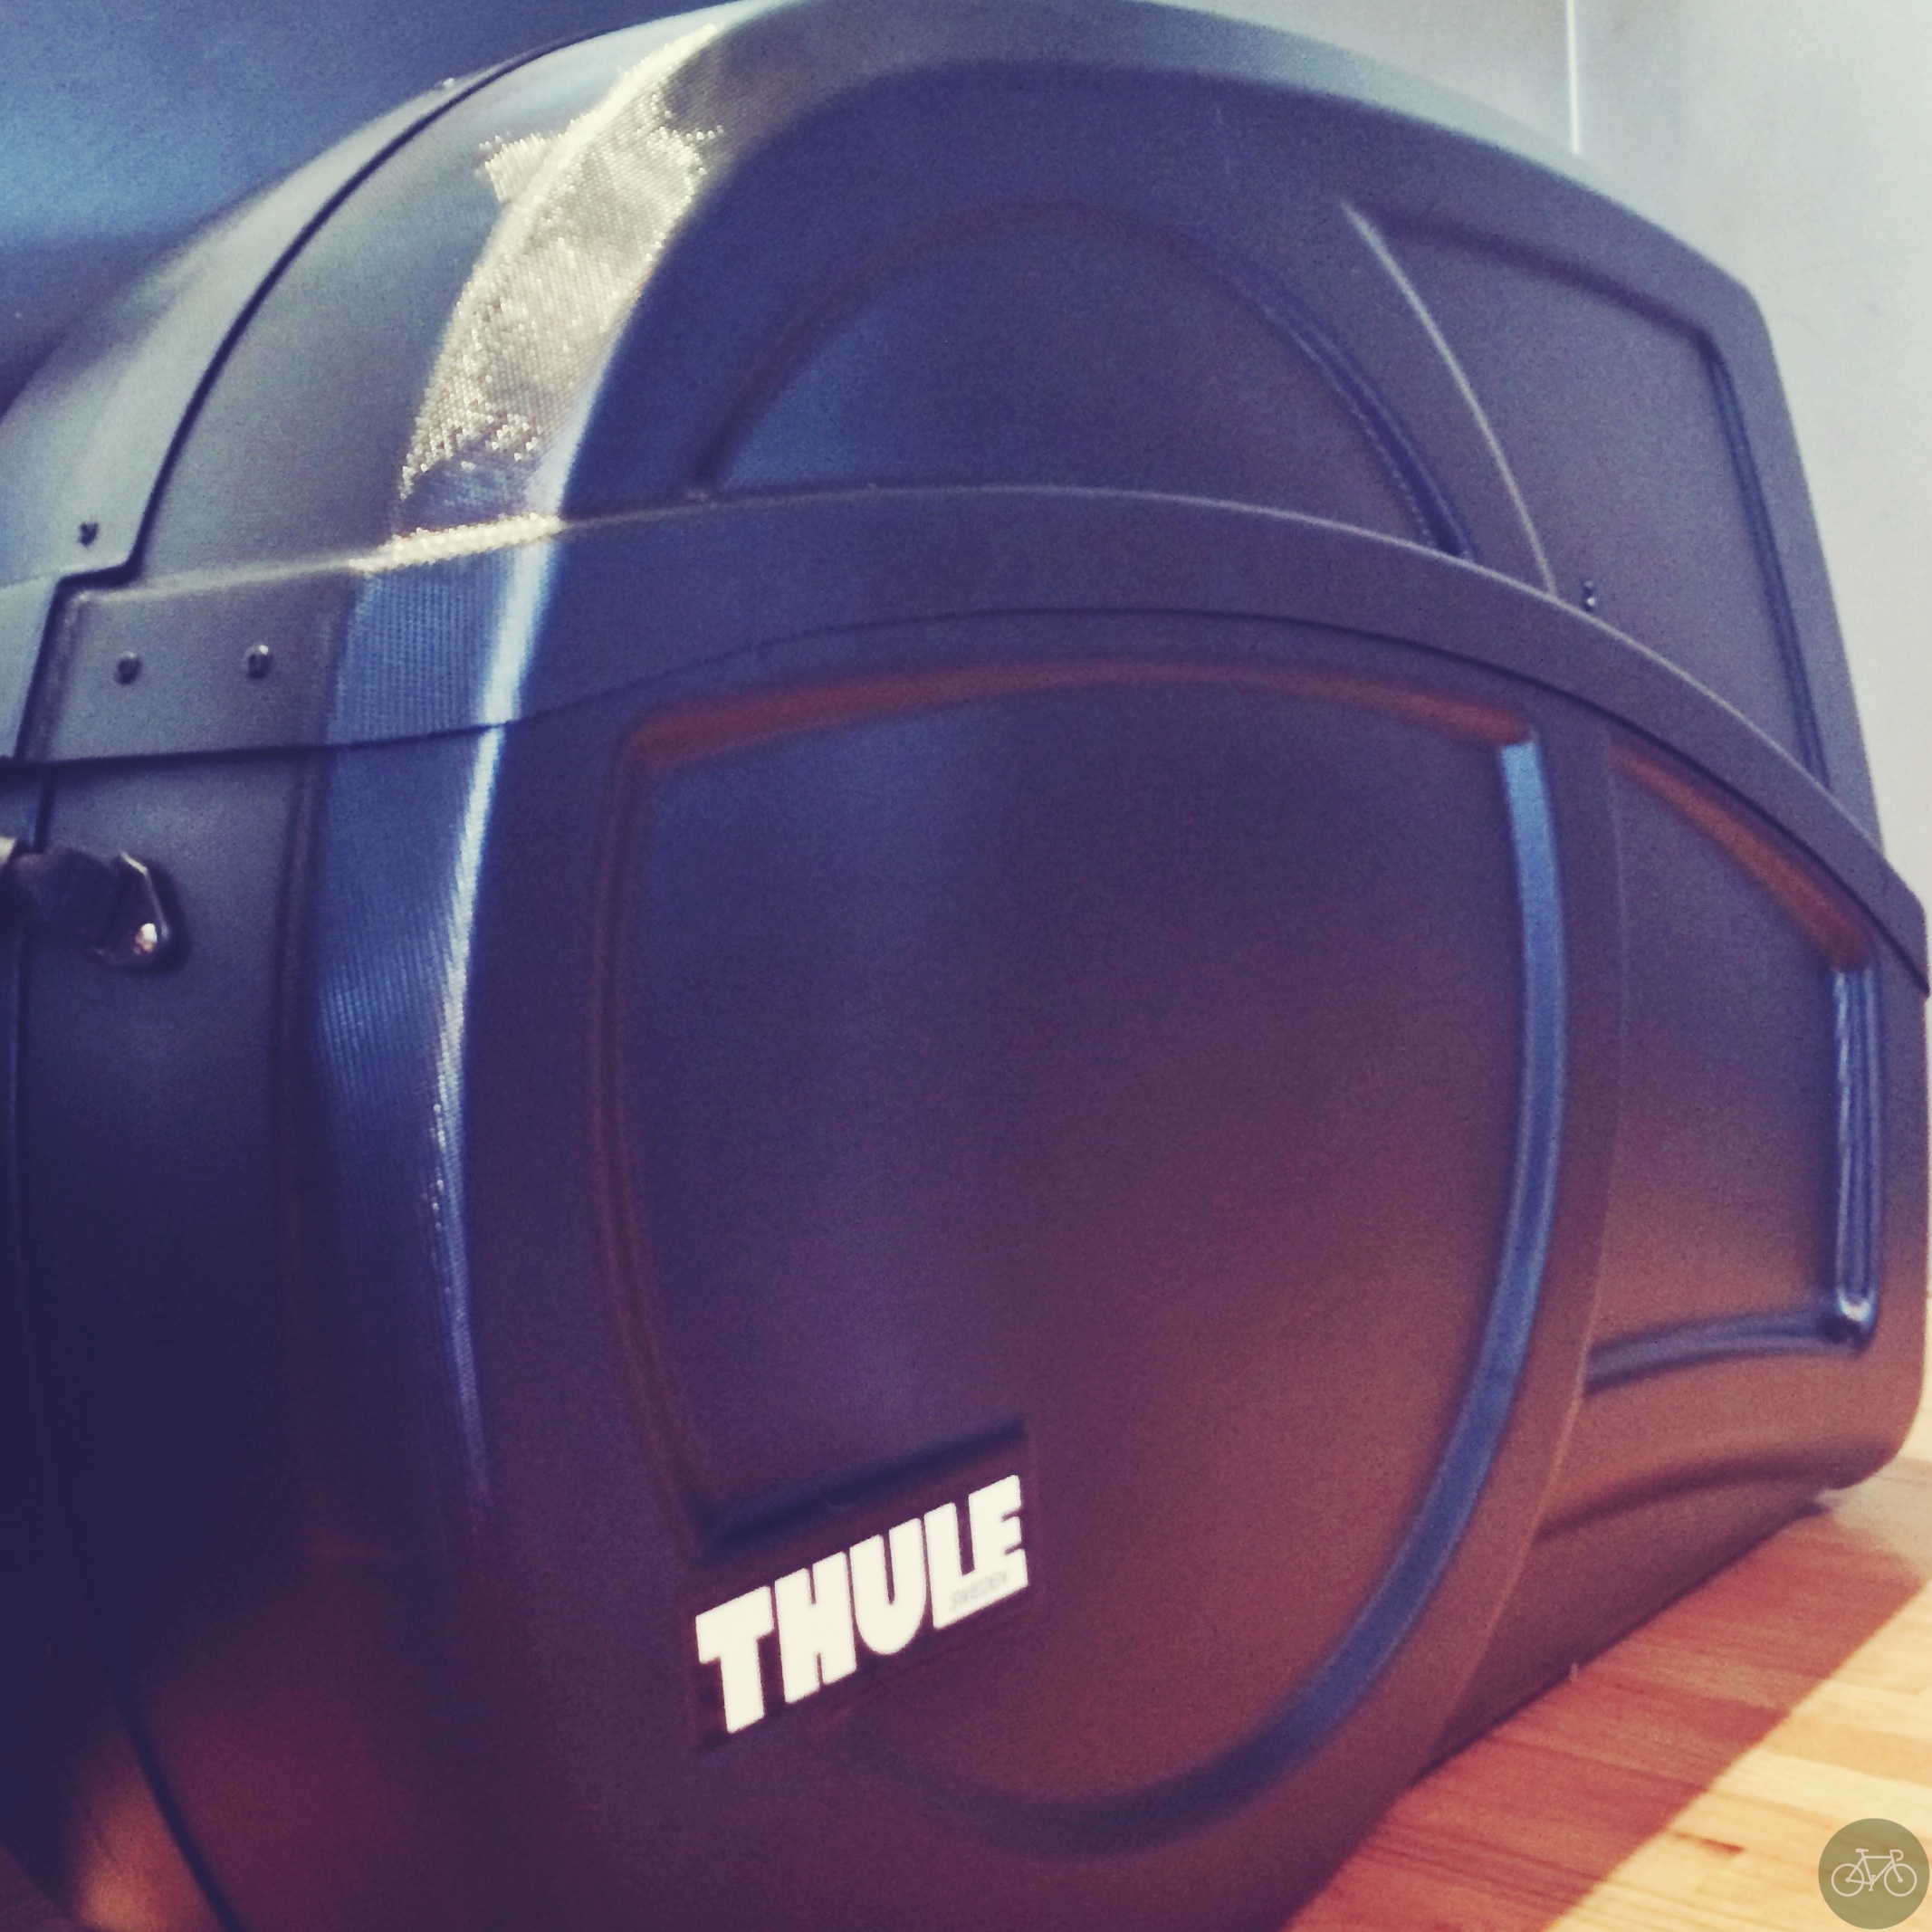 Thule Round Trip Transition